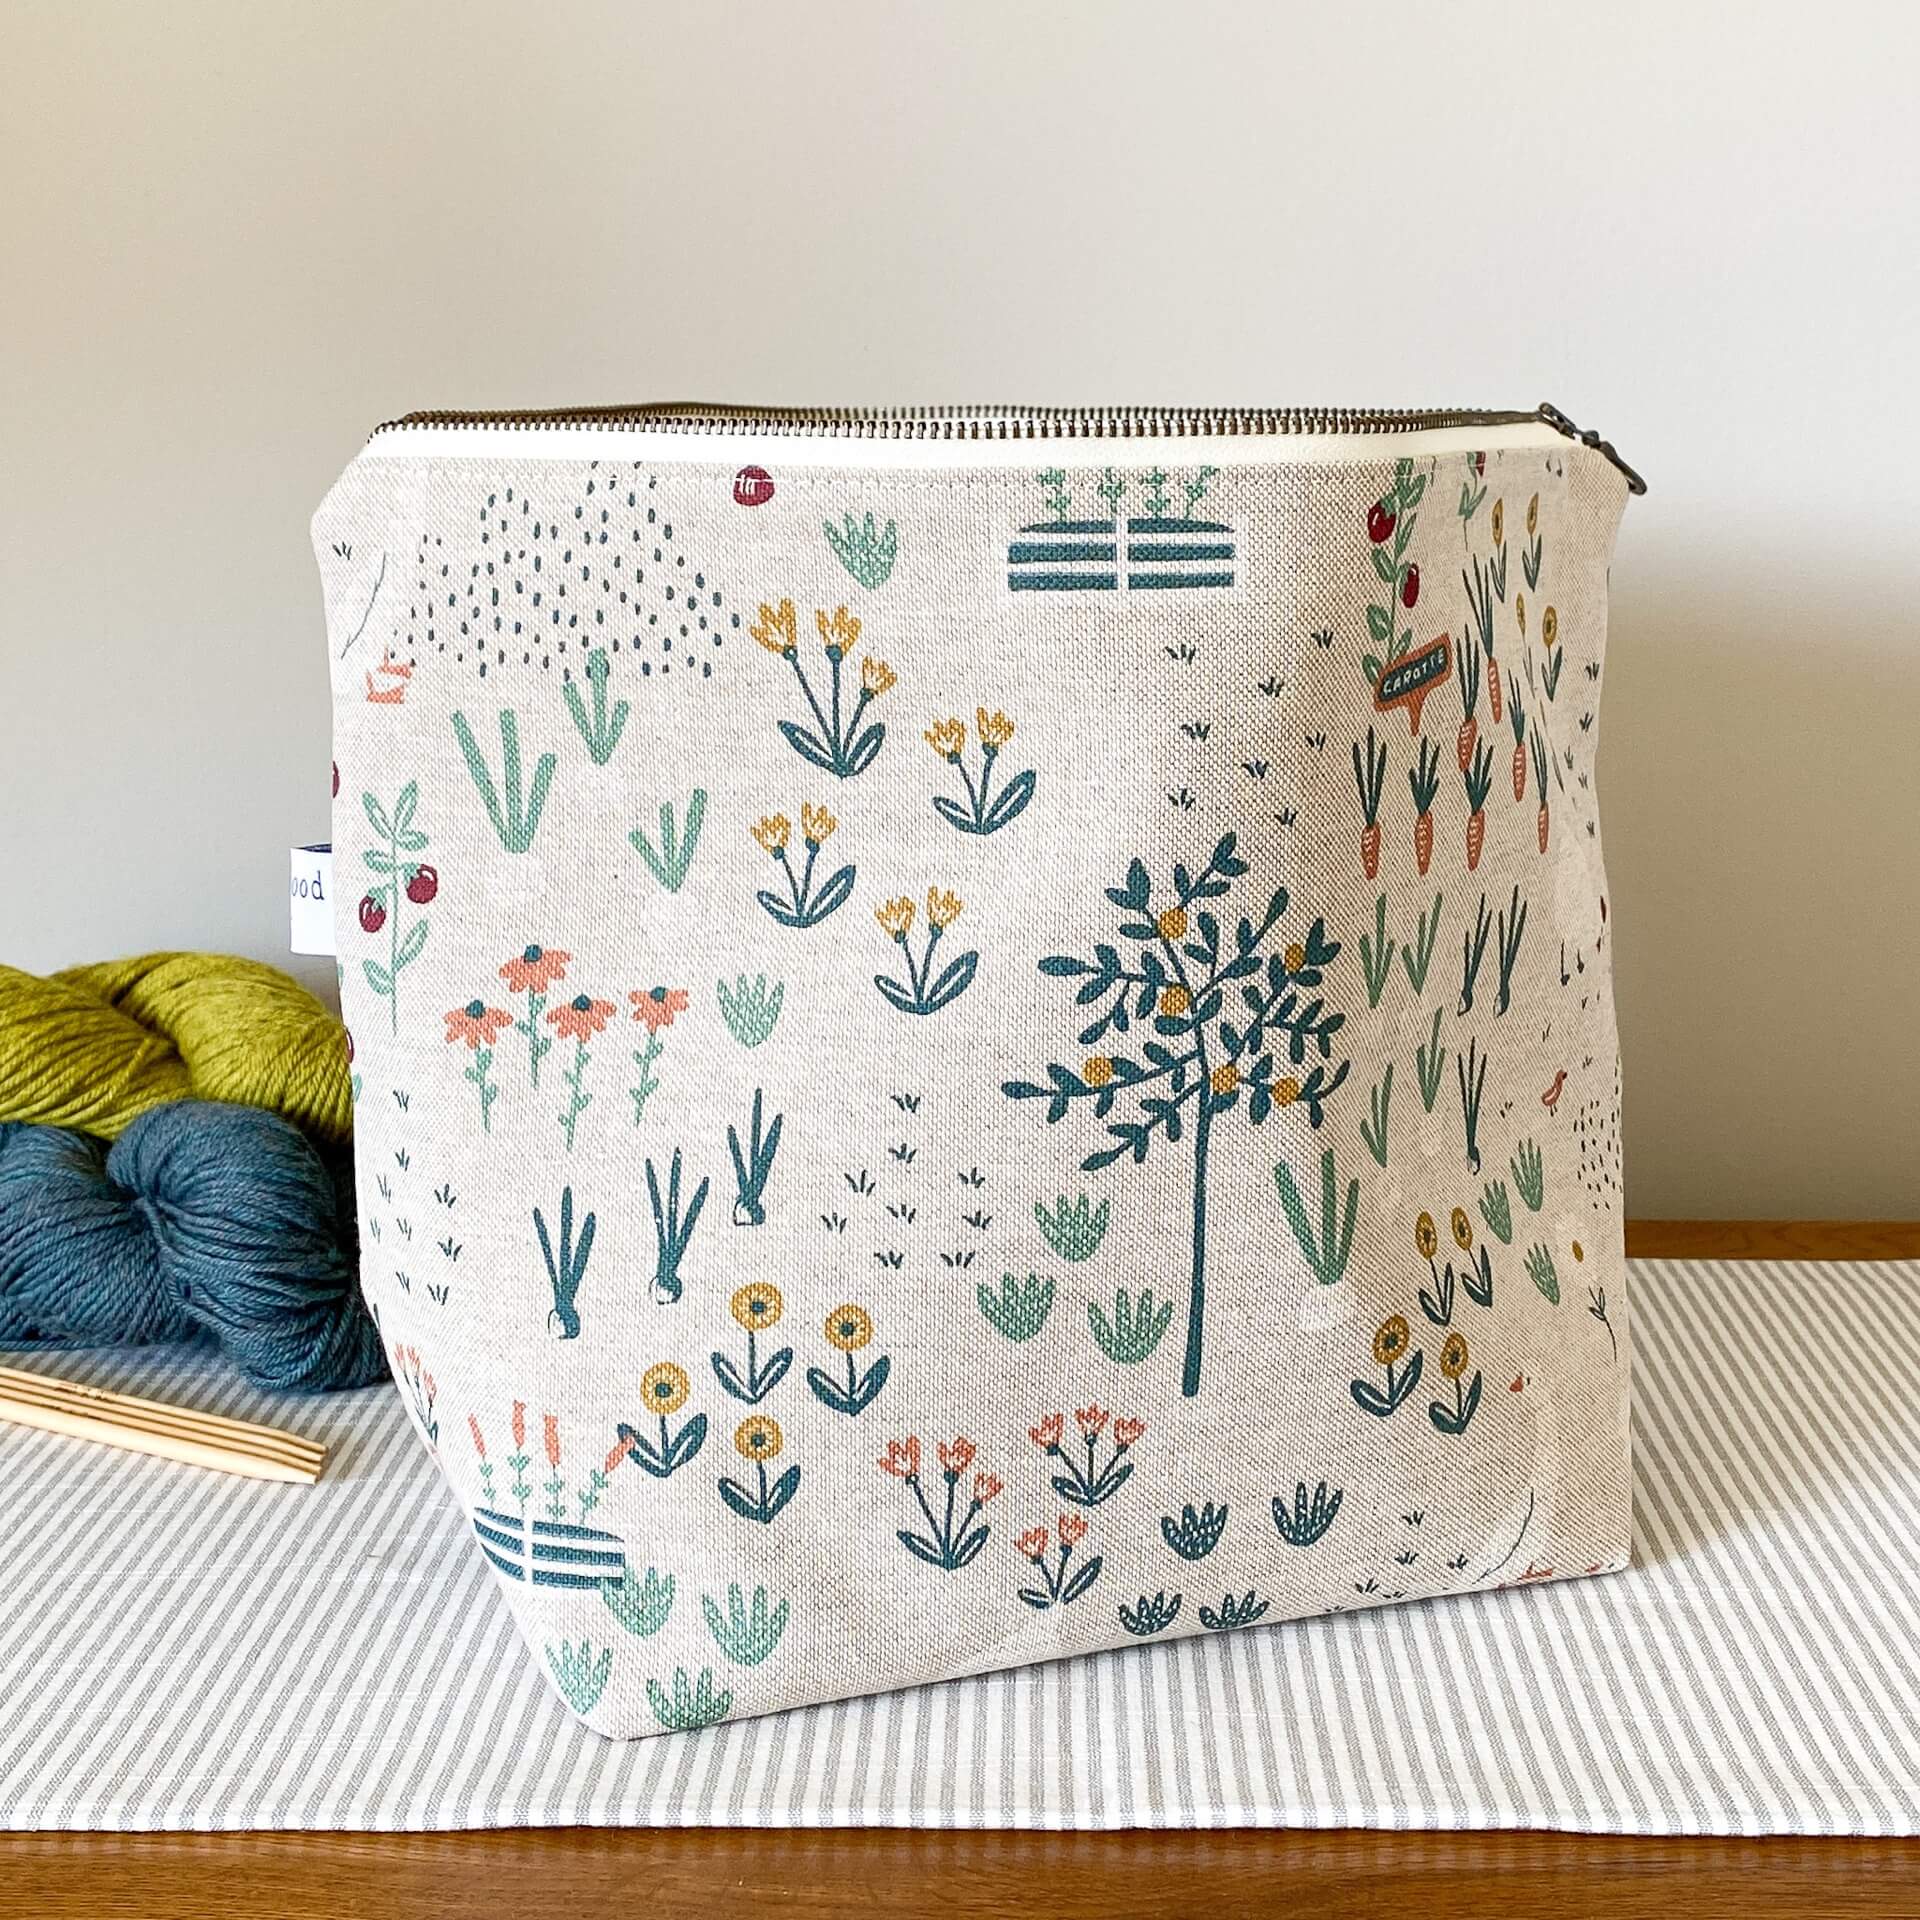 A zippered project bag sits on a table top. Behind the bag are some skeins of yarn in different colours neatly arranged. Also in view are some wooden knitting needles. The bag is at the centre of the image and is made from a fabric that depicts a cottage garden. 